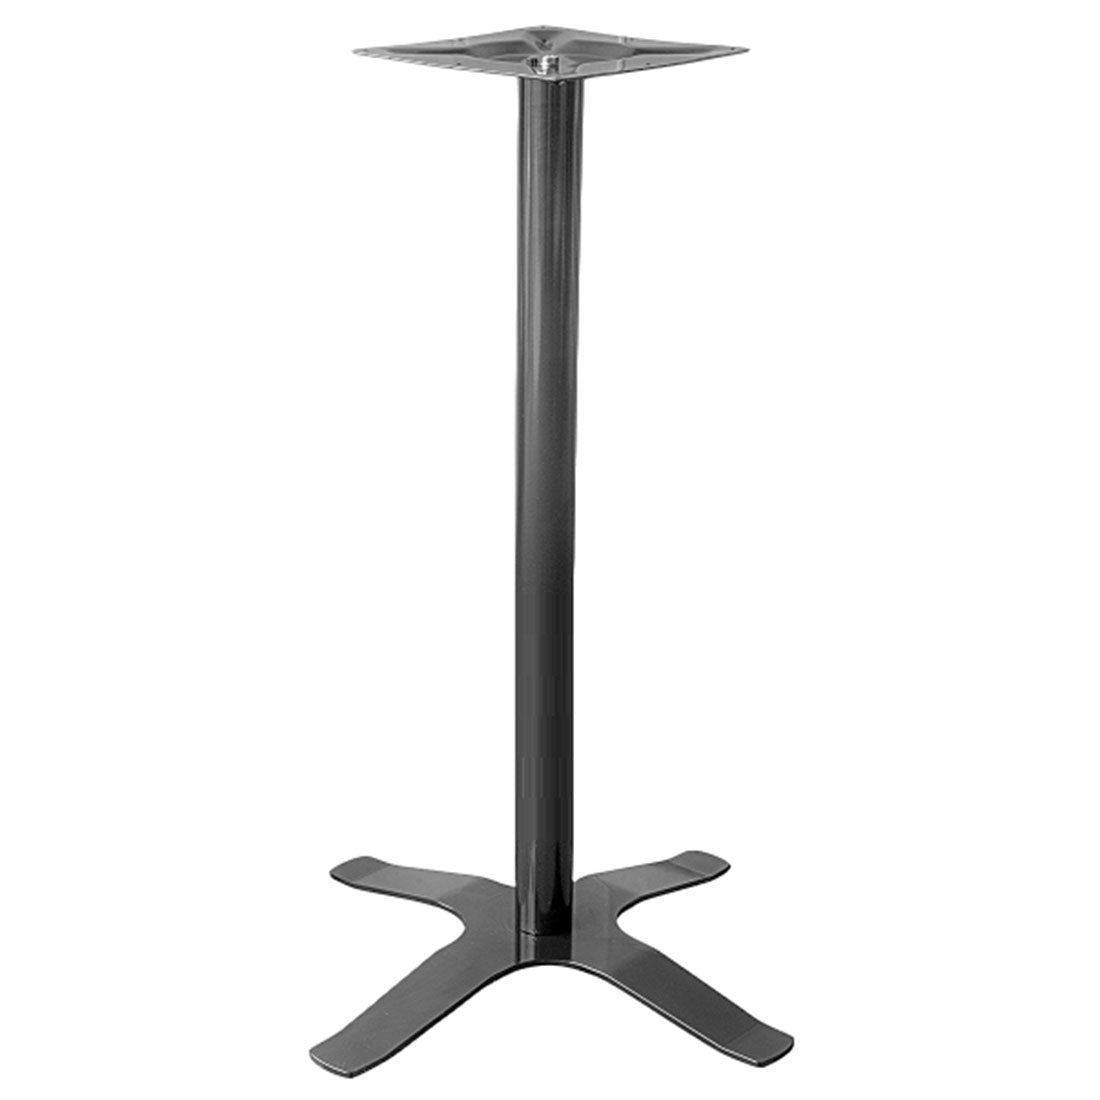 Coral Star Table Base - switchoffice.com.au